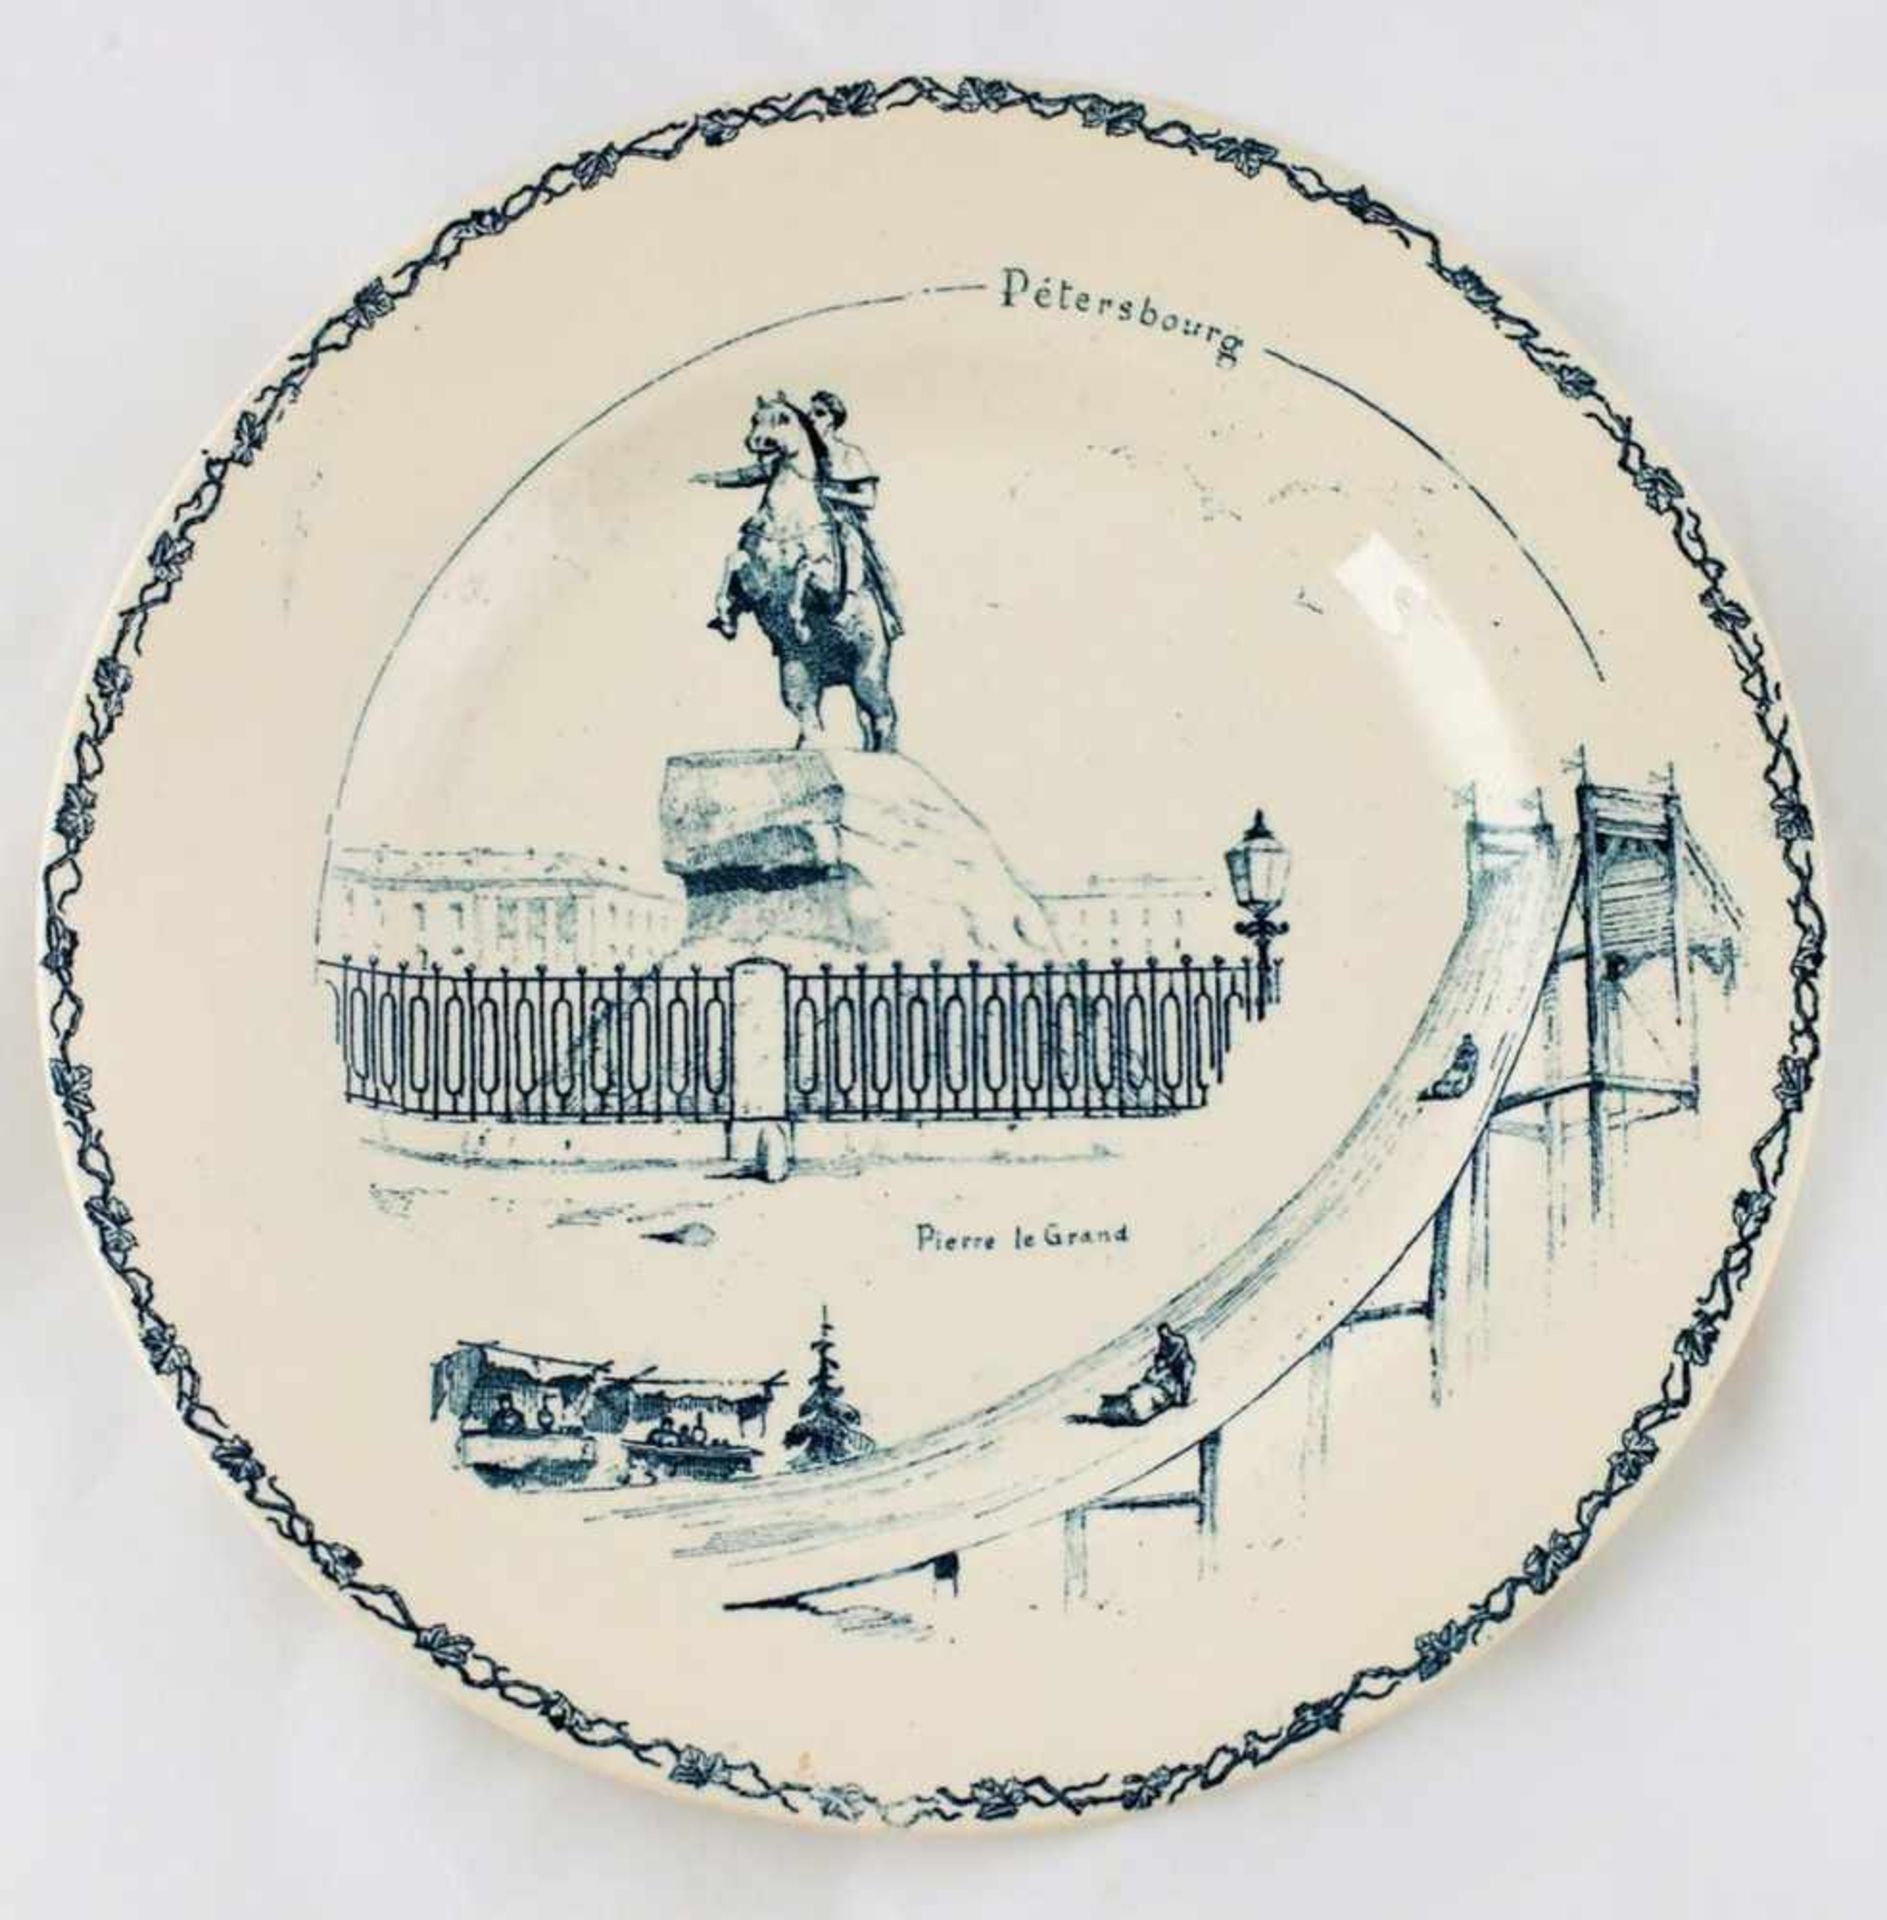 Decorative plate with a view of St. Petersburg and the Bronze Horseman statue. [France]. [Early